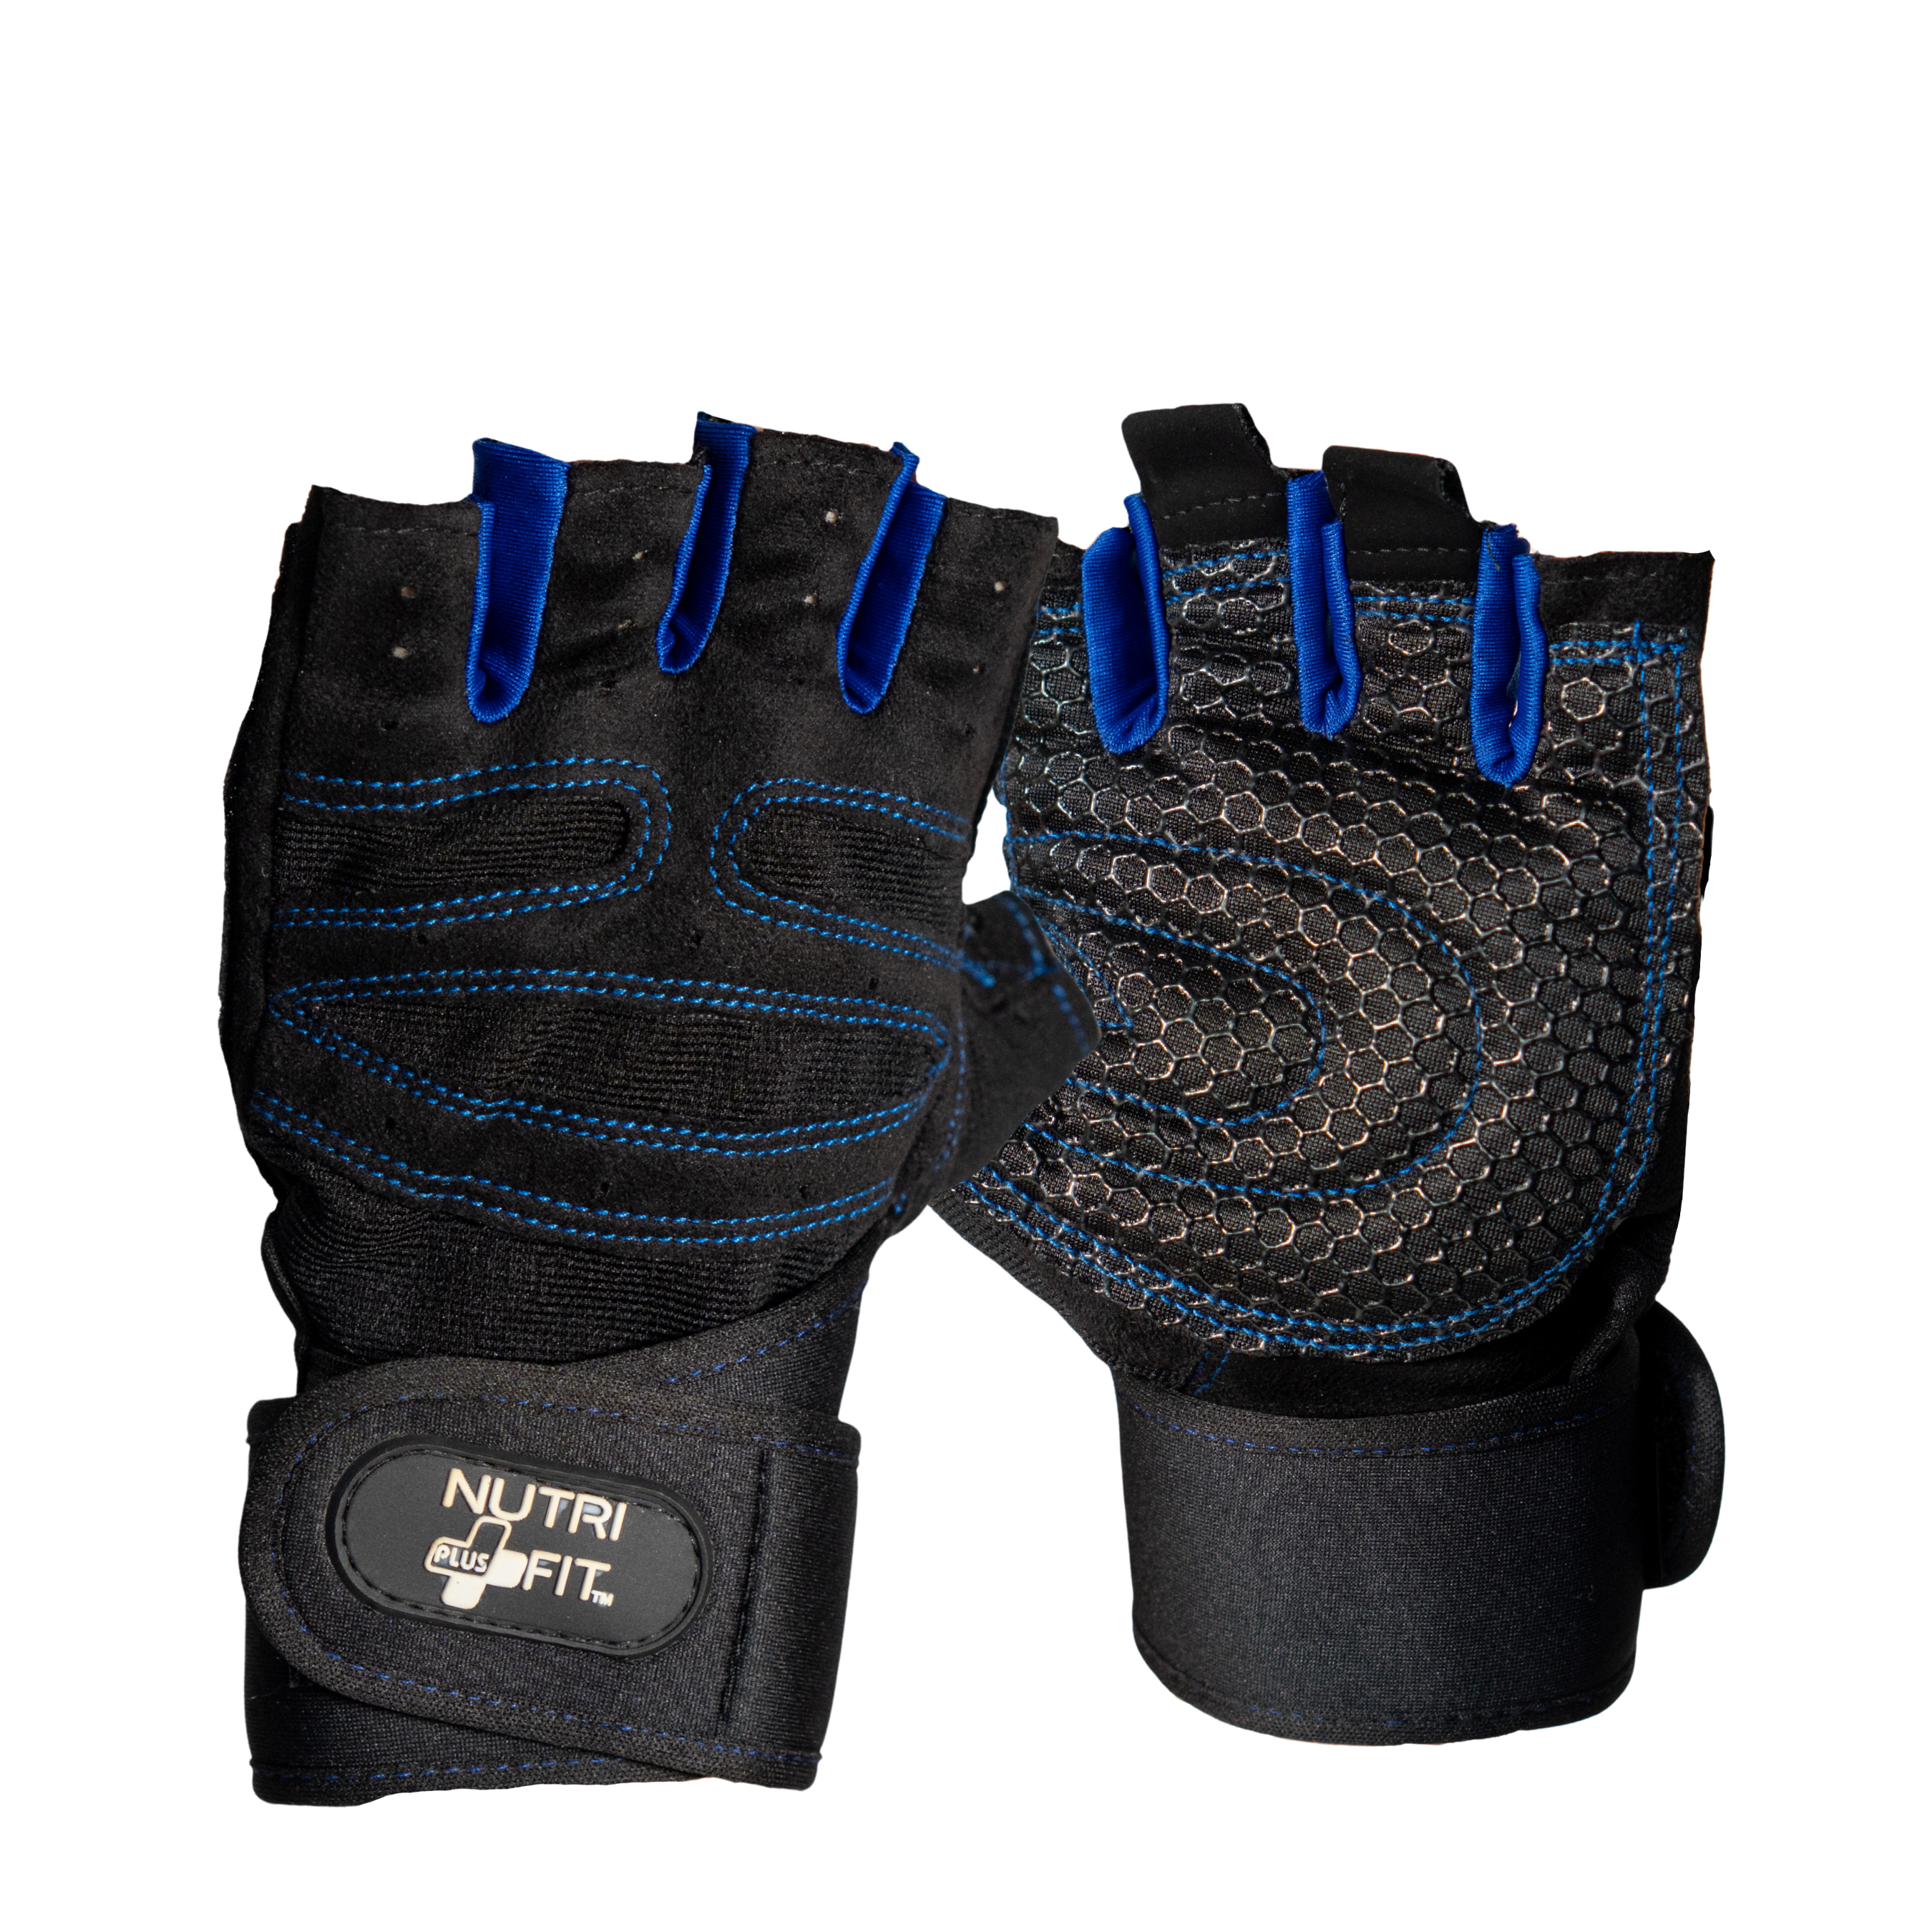 Nutrifit Plus High Performance Intenses Training Gloves with Wristswrap for Support in Multicolors